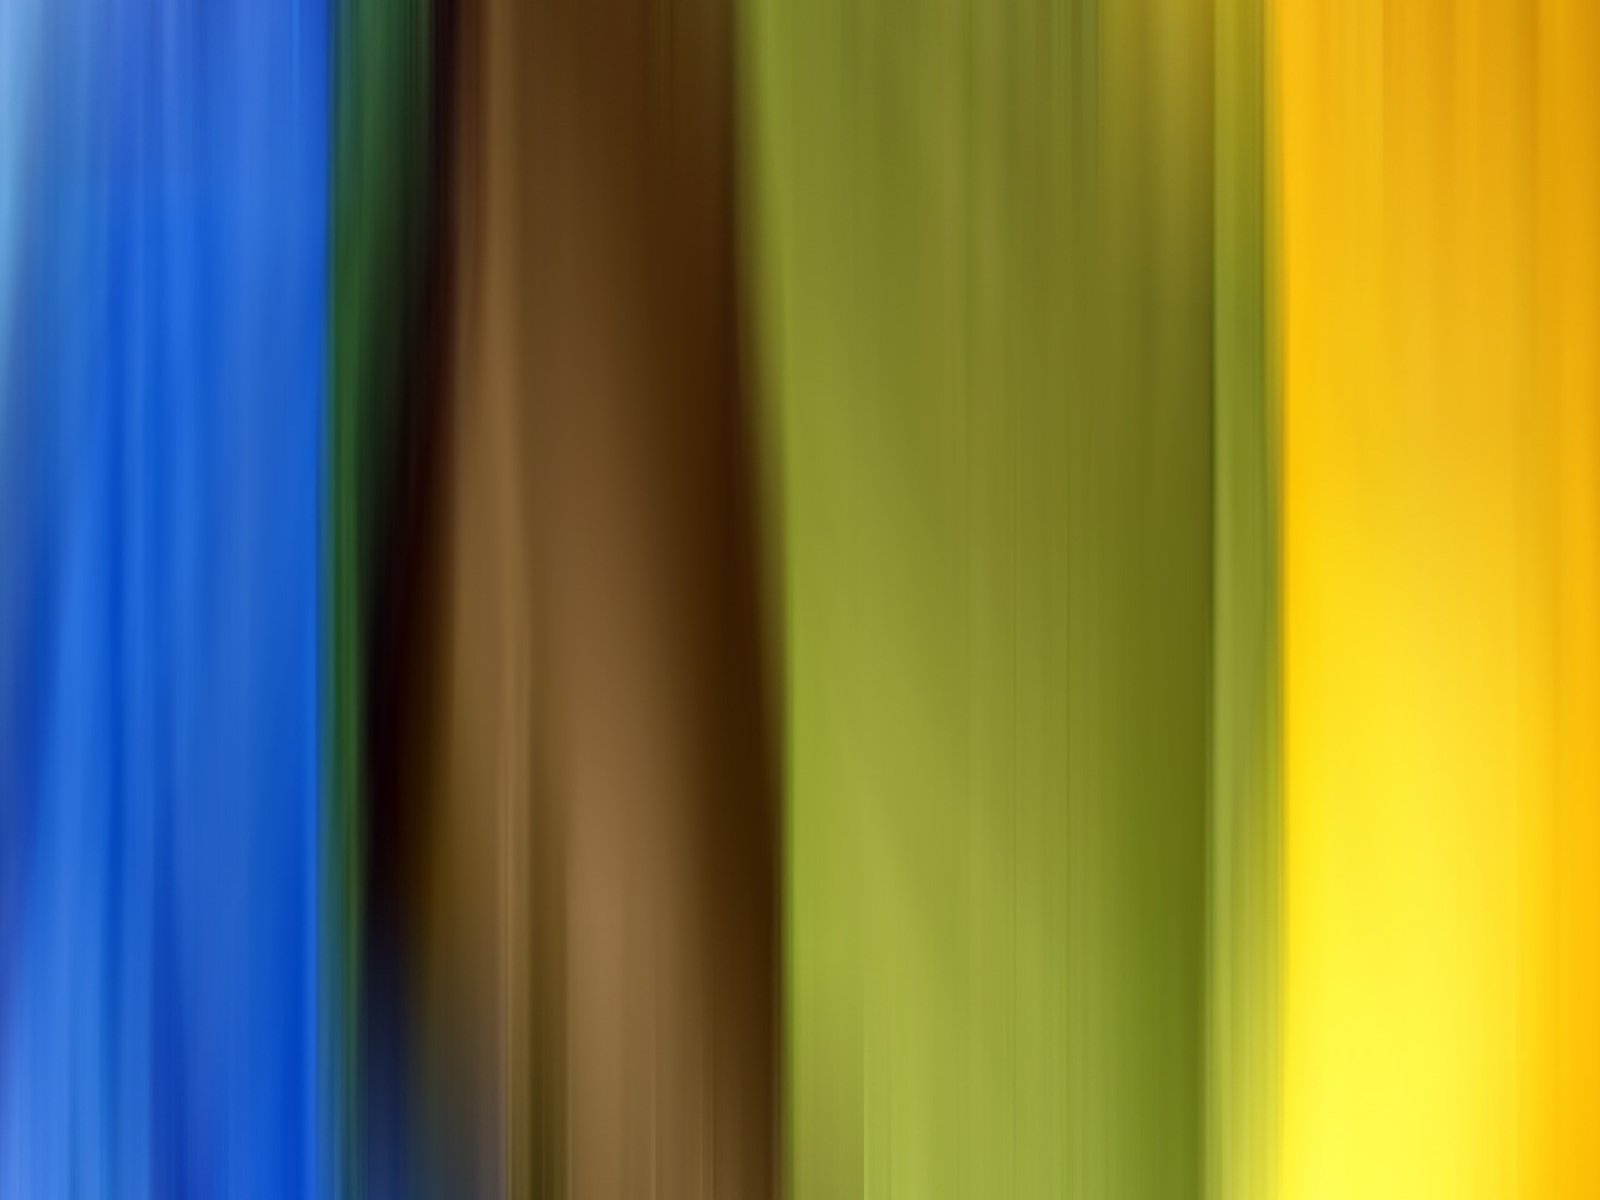 an abstract pograph of different colors of material